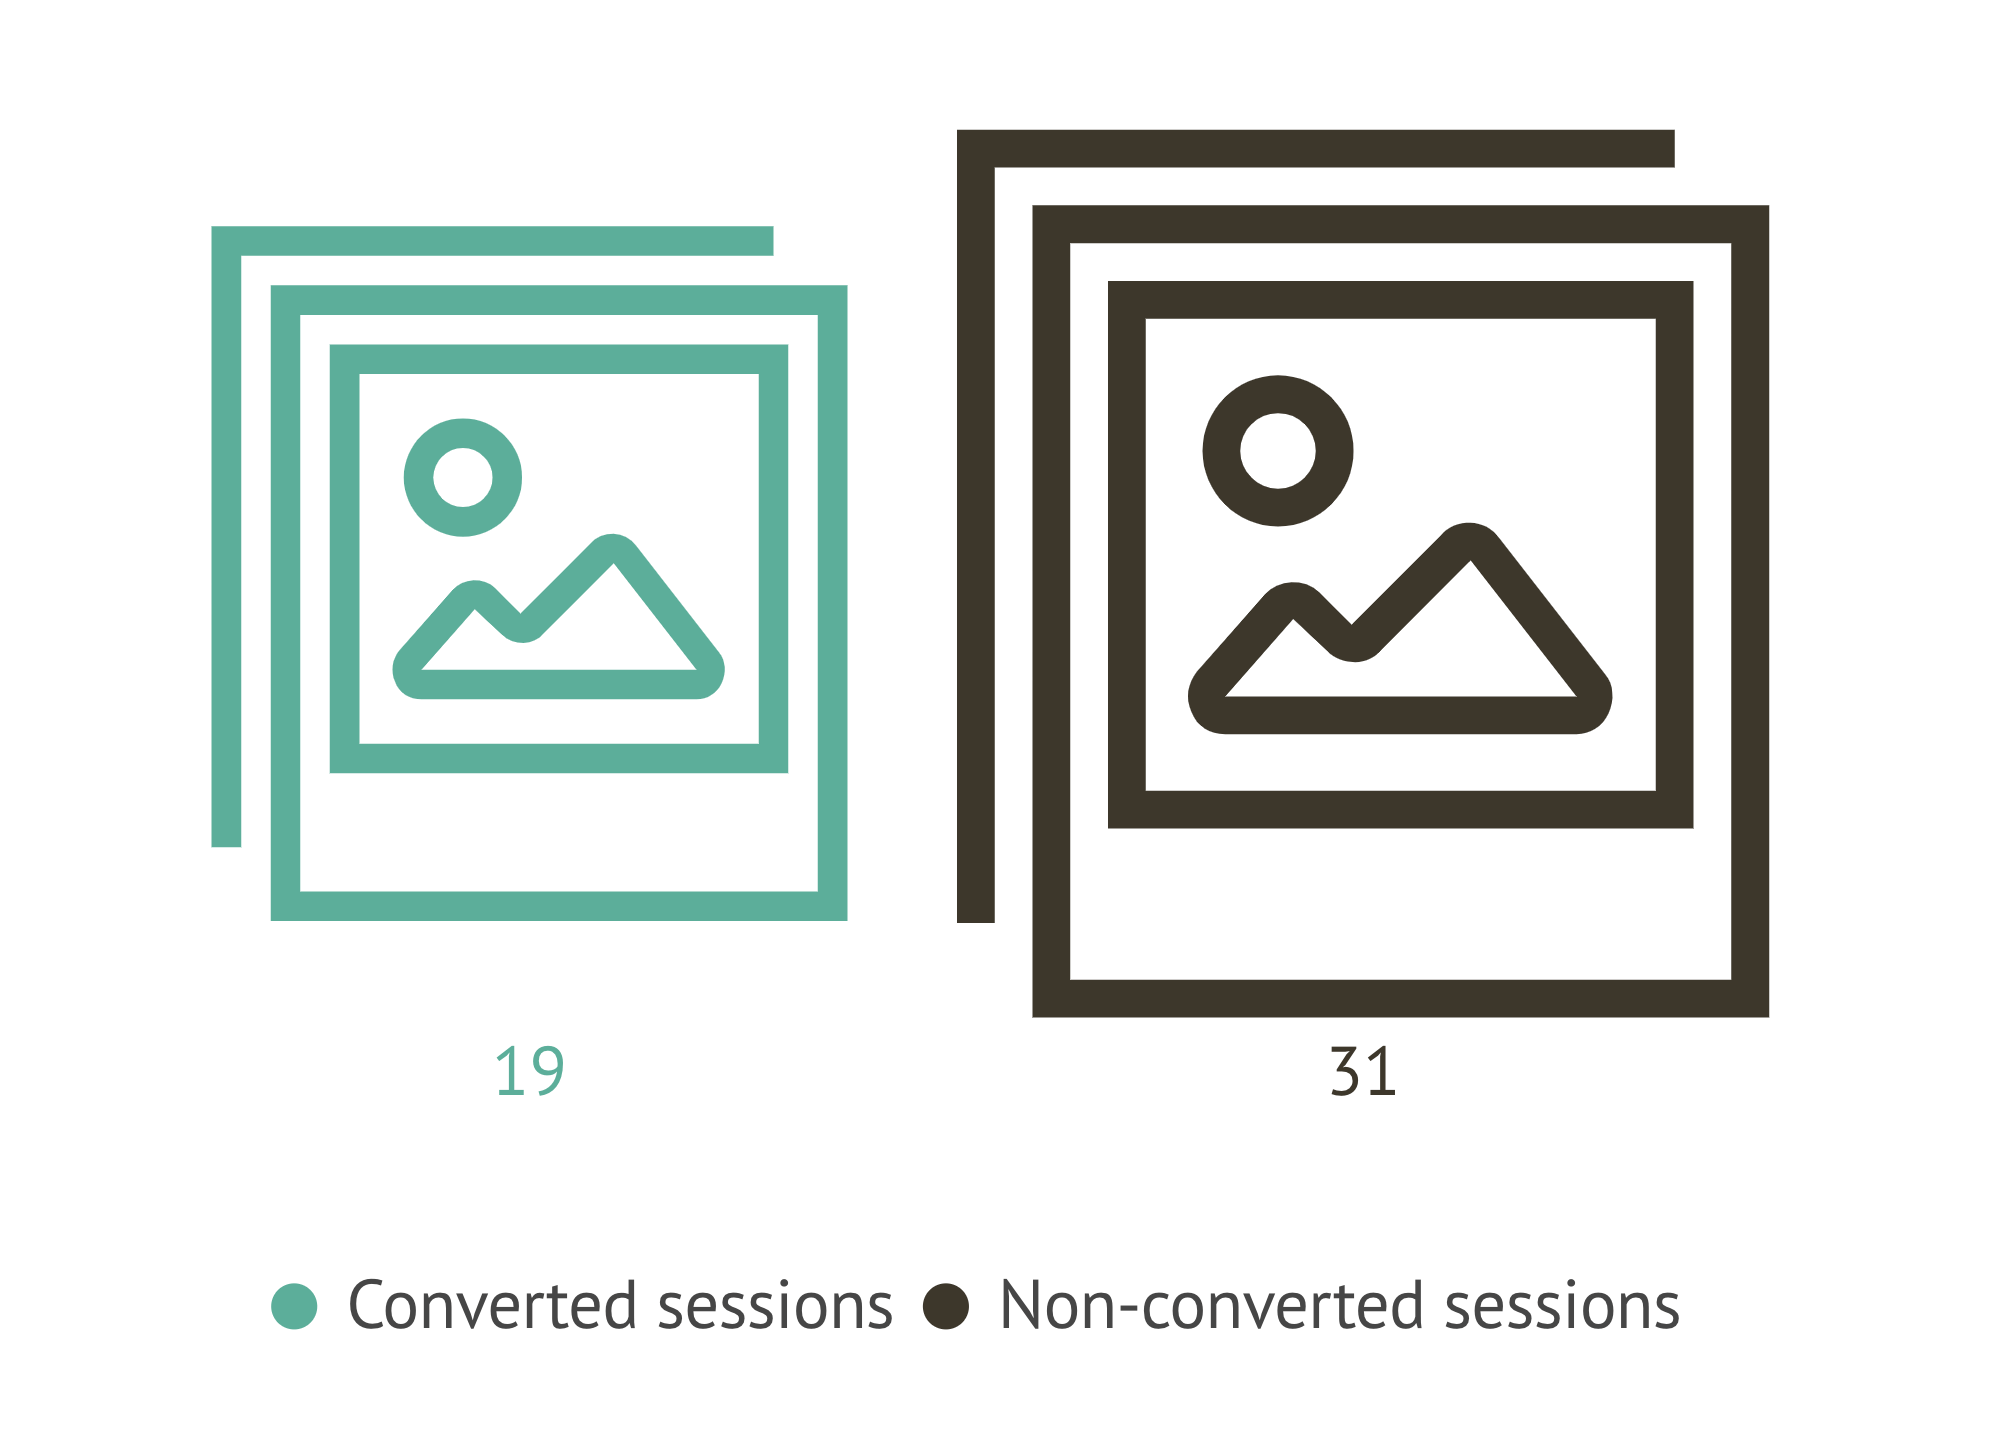 Converted sessions vs non-converted sessions.